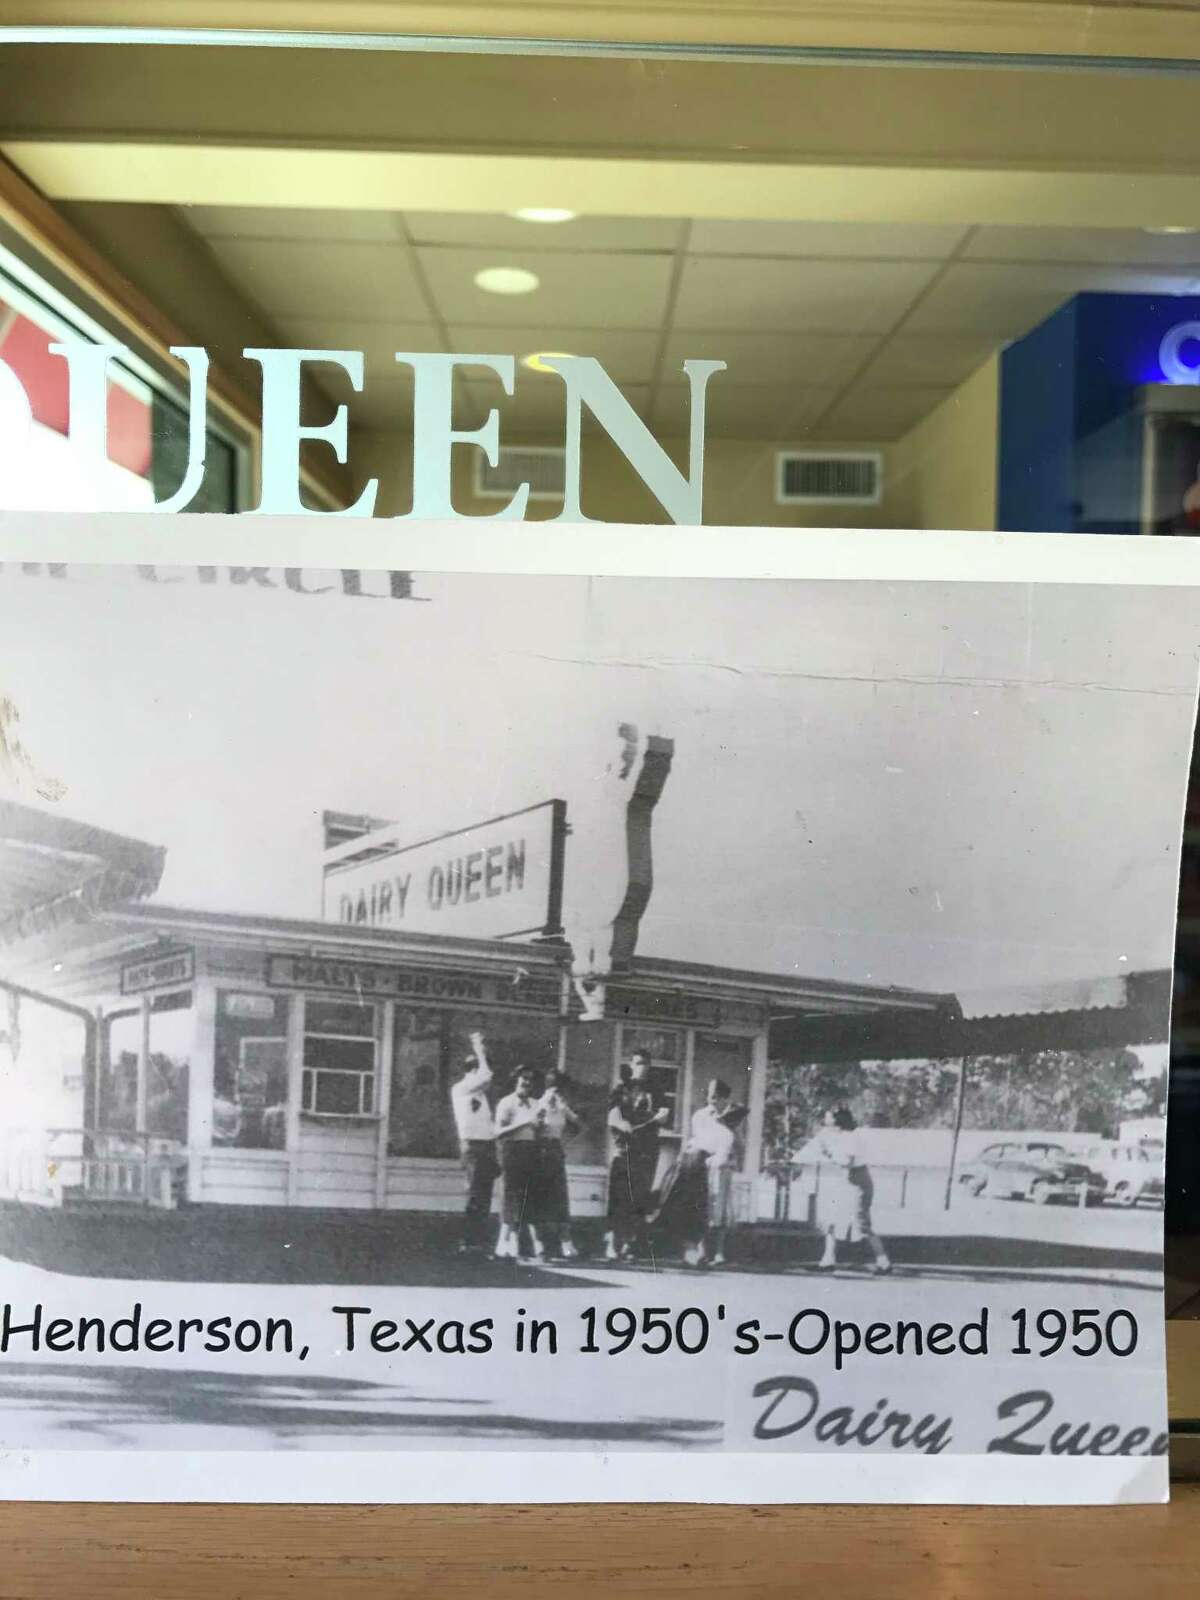 The Henderson Dairy Queen, the oldest in Texas, has been in continuous operation since 1950.